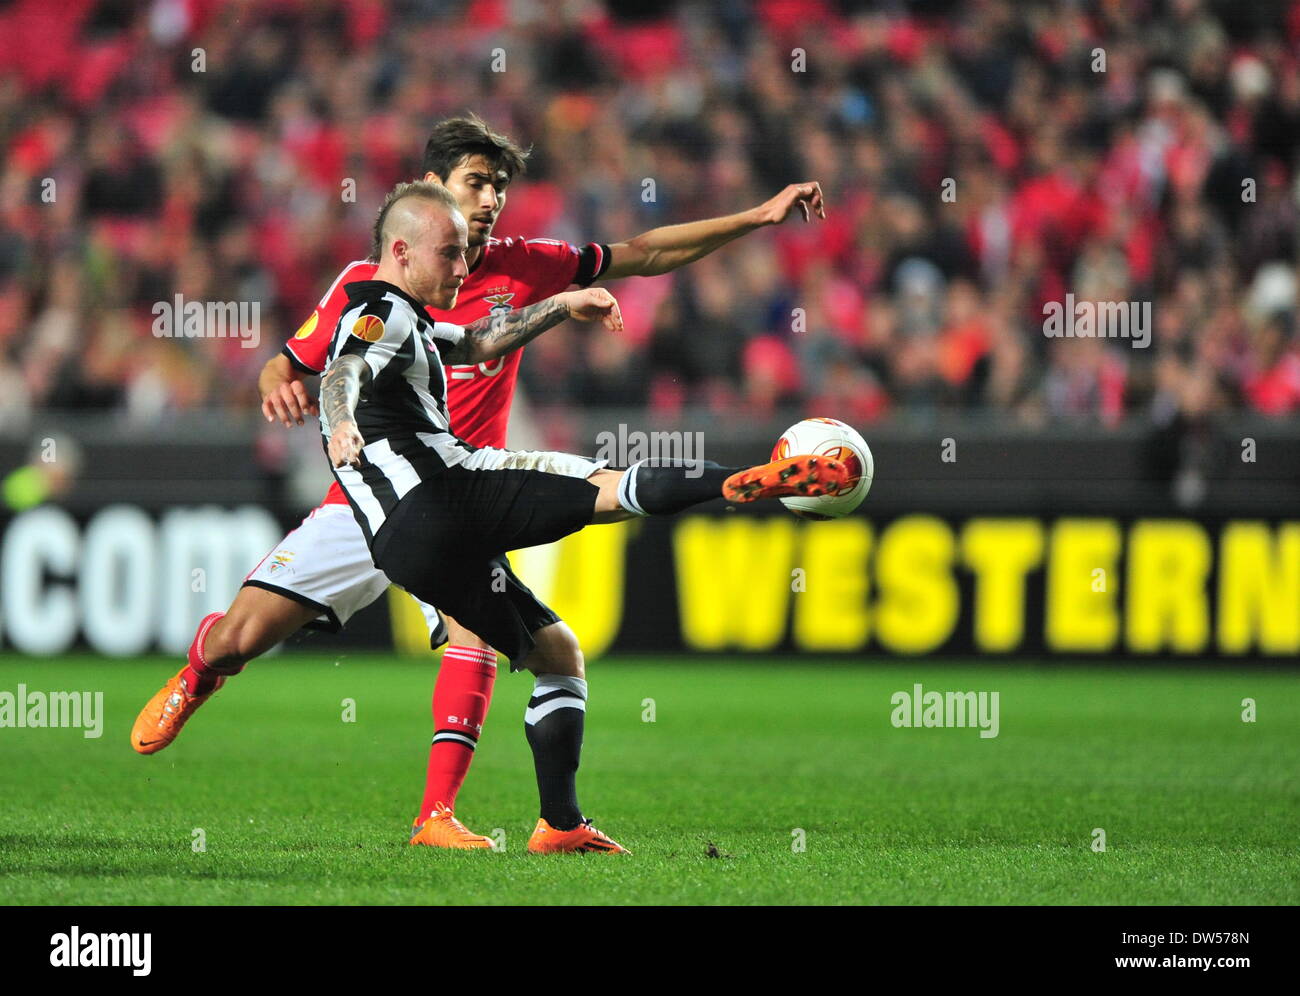 Lisbon, Portugal. 27th Feb, 2014. Andre Gomes (Back) of Benfica fights for the ball during the UEFA Europa League round of 32 second-leg football match between Benfica and PAOK Thessaloniki of Greece at the Luz stadium in Lisbon, capital of Portugal, on Feb. 27, 2014. Benfica defeated PAOK 3-0 to go through 4-0 on aggregate. Credit:  Zhang Liyun/Xinhua/Alamy Live News Stock Photo